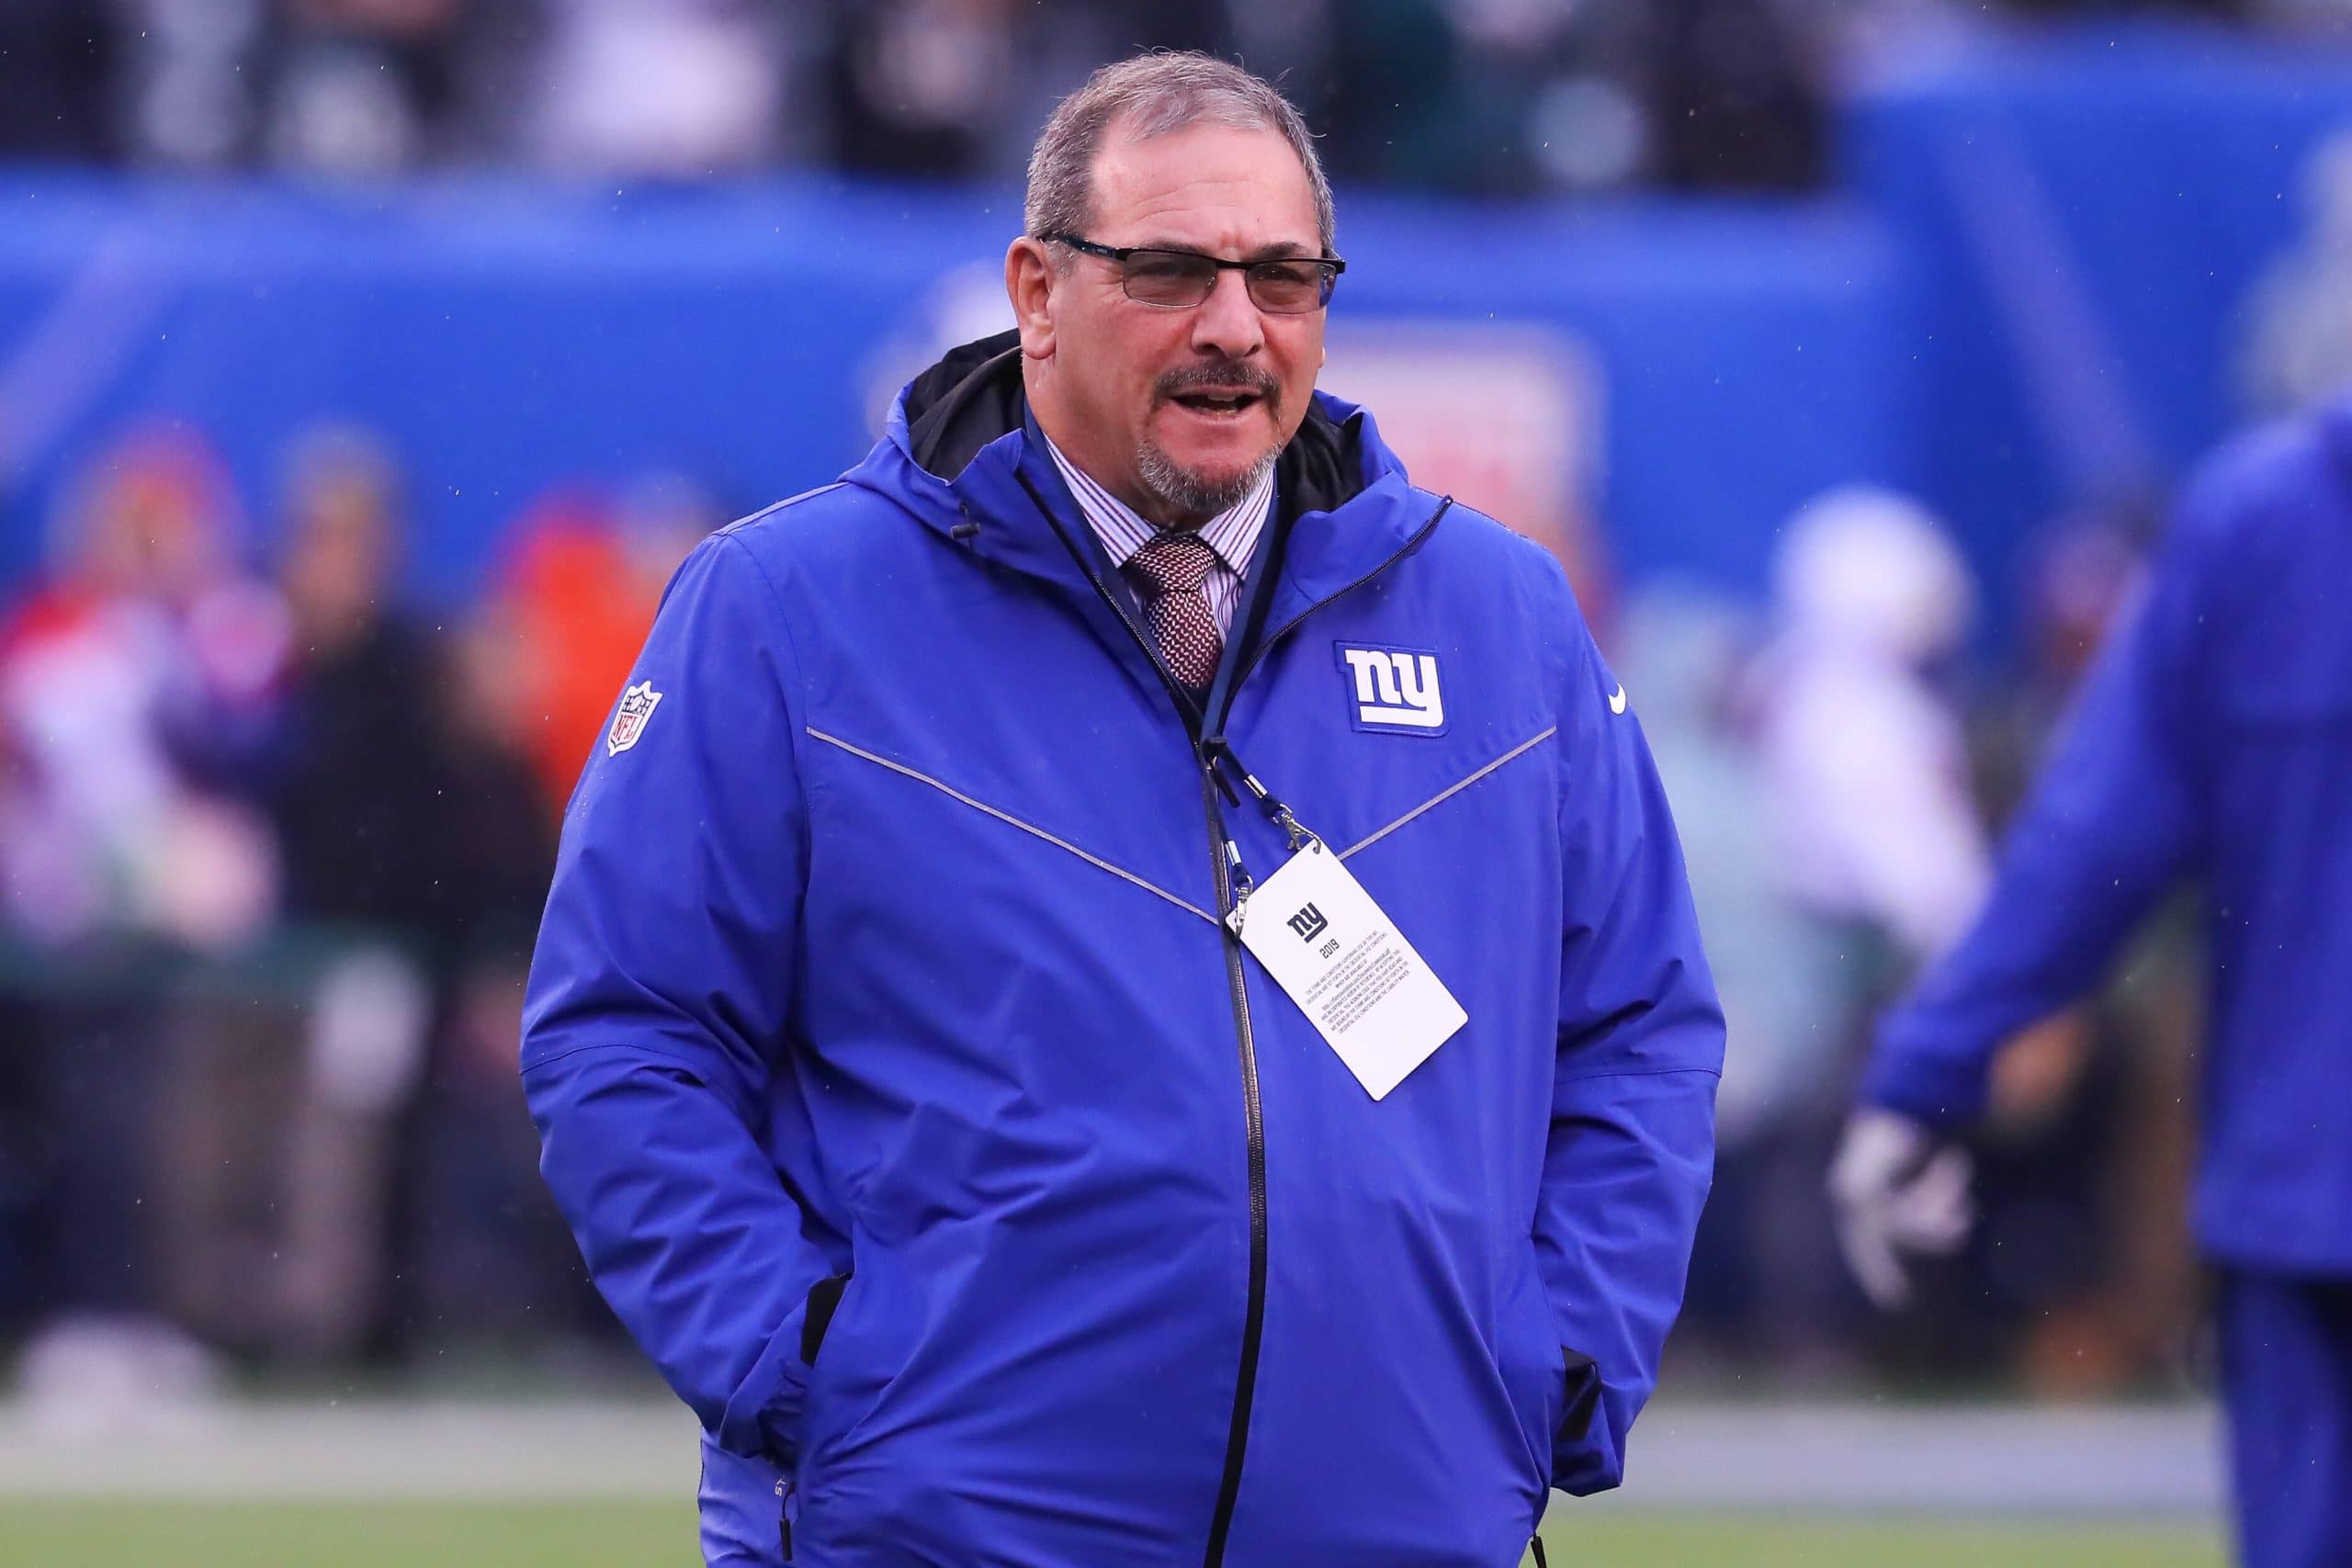 EAST RUTHERFORD, NJ - DECEMBER 29: New York Giants general manager Dave Gettleman prior to the National Football League